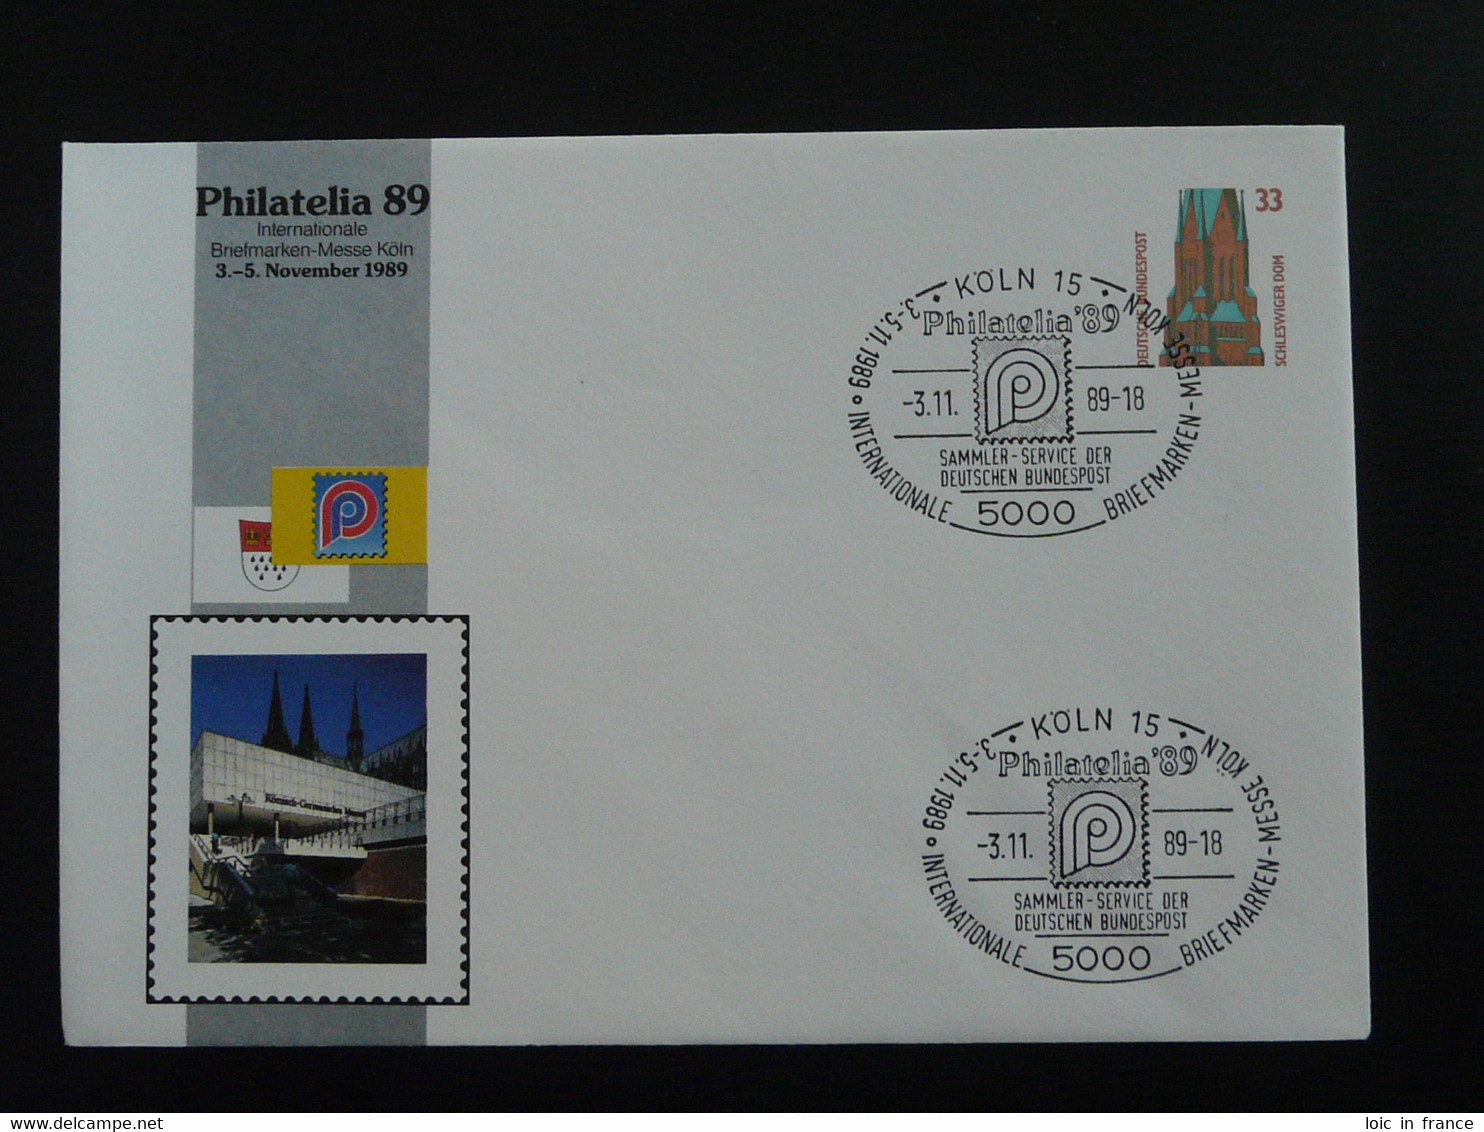 Entier Postal Stationery 40 Ans Parlement Européen Europarat Europe Koln 1989 (ex 2) - Private Covers - Used